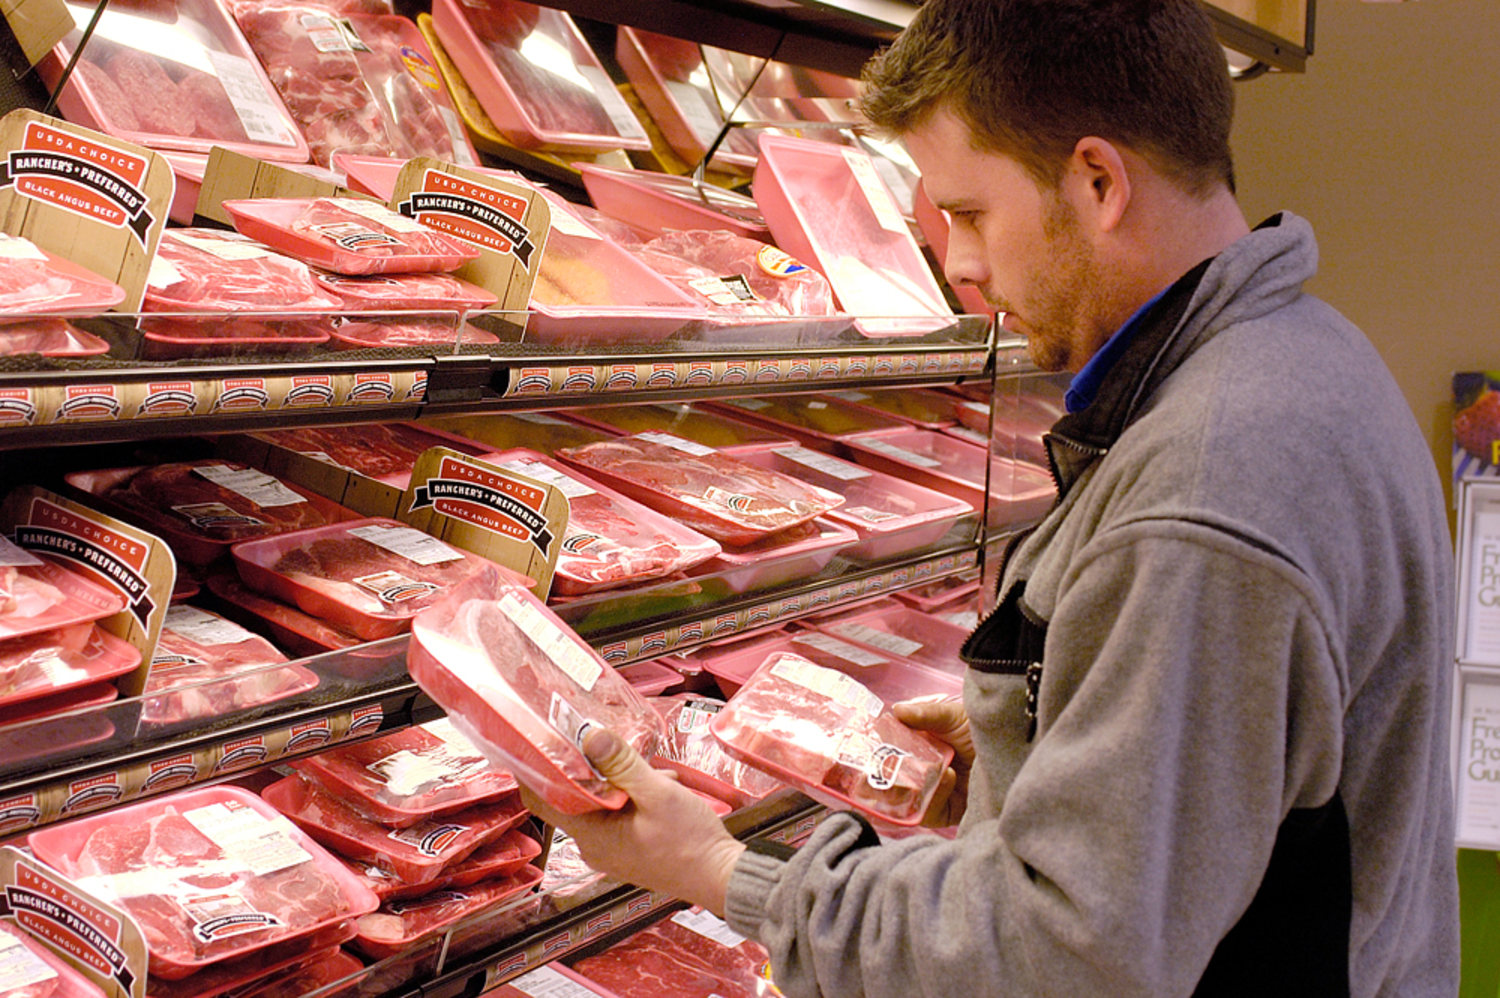 Businesses target shoppers clueless about meat